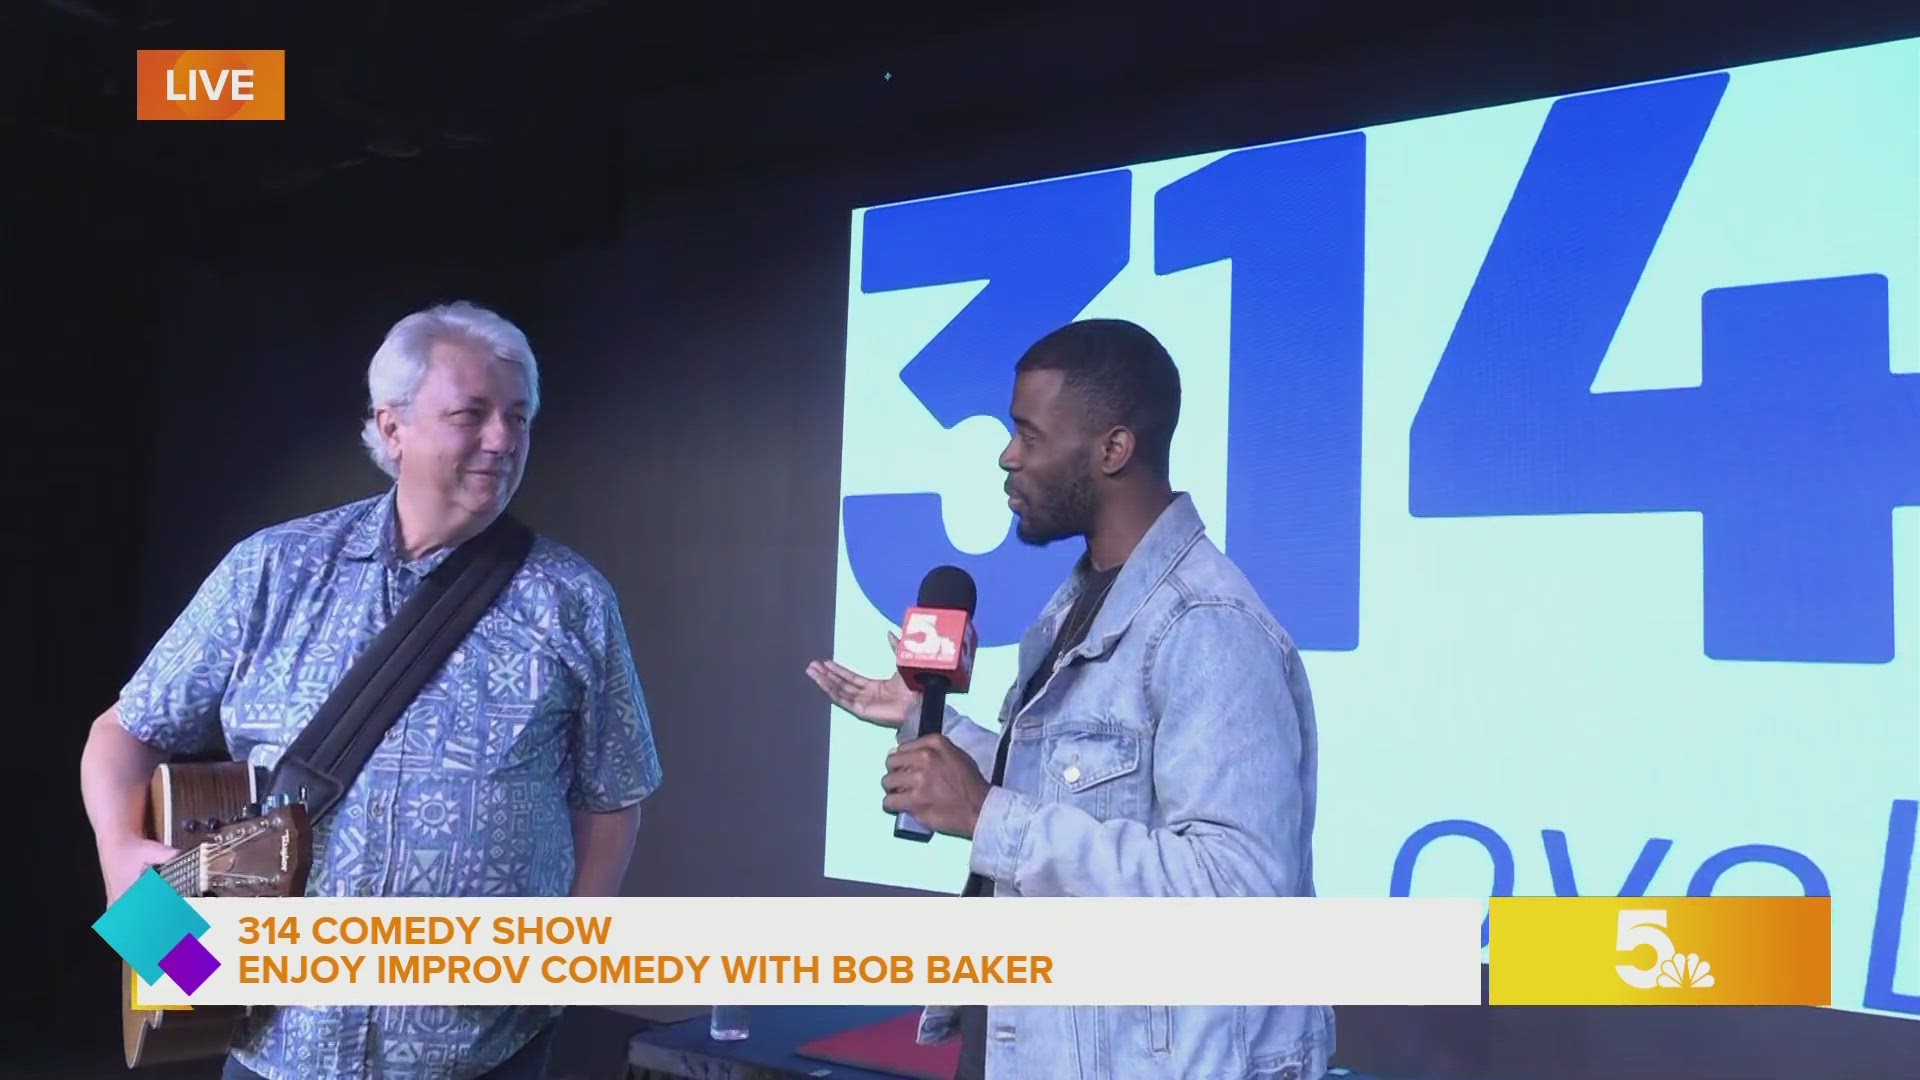 Comedian, Bob Baker, is going to unleash improv comedy like you've never seen before.